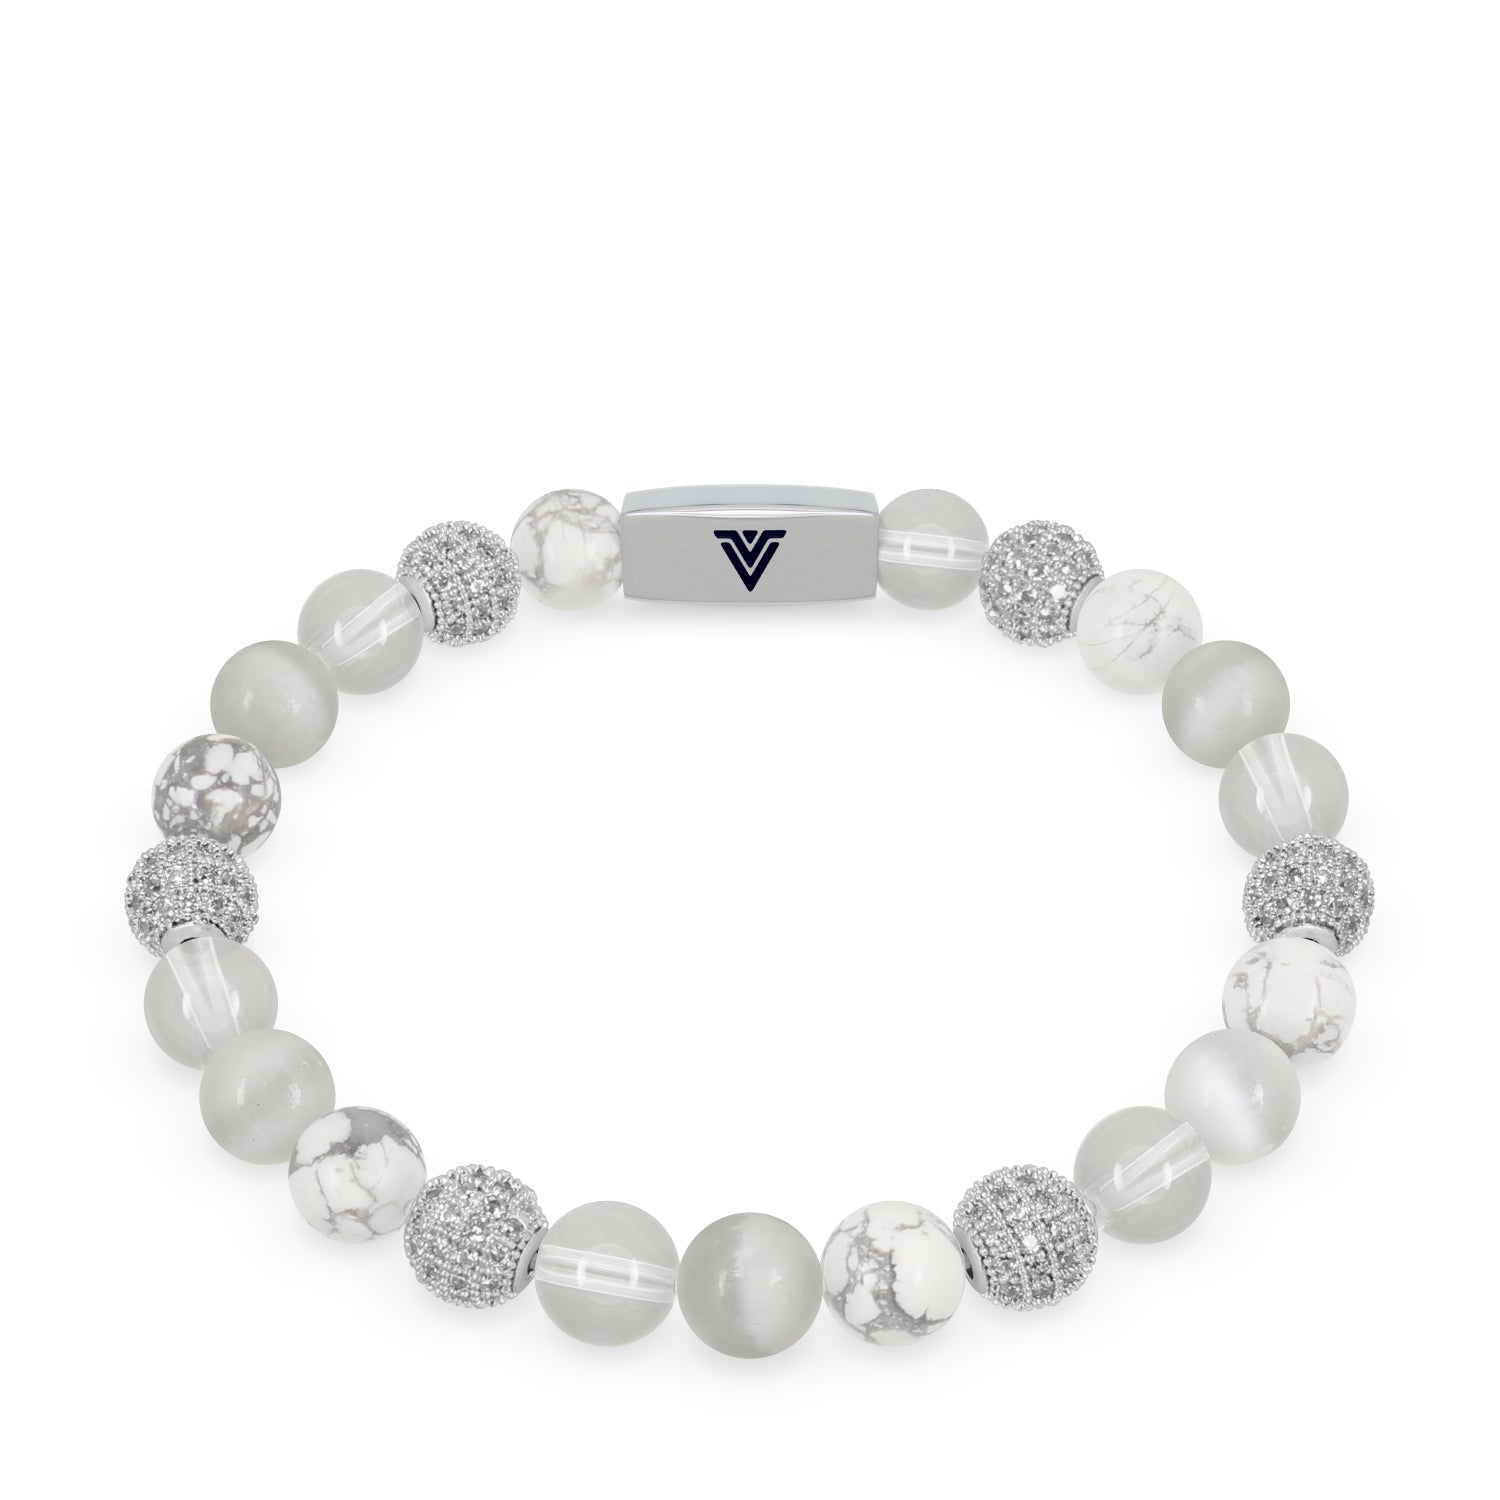 Front view of an 8mm White Sirius beaded stretch bracelet featuring Howlite, Silver Pave, Quartz, & Selenite crystal and silver stainless steel logo bead made by Voltlin